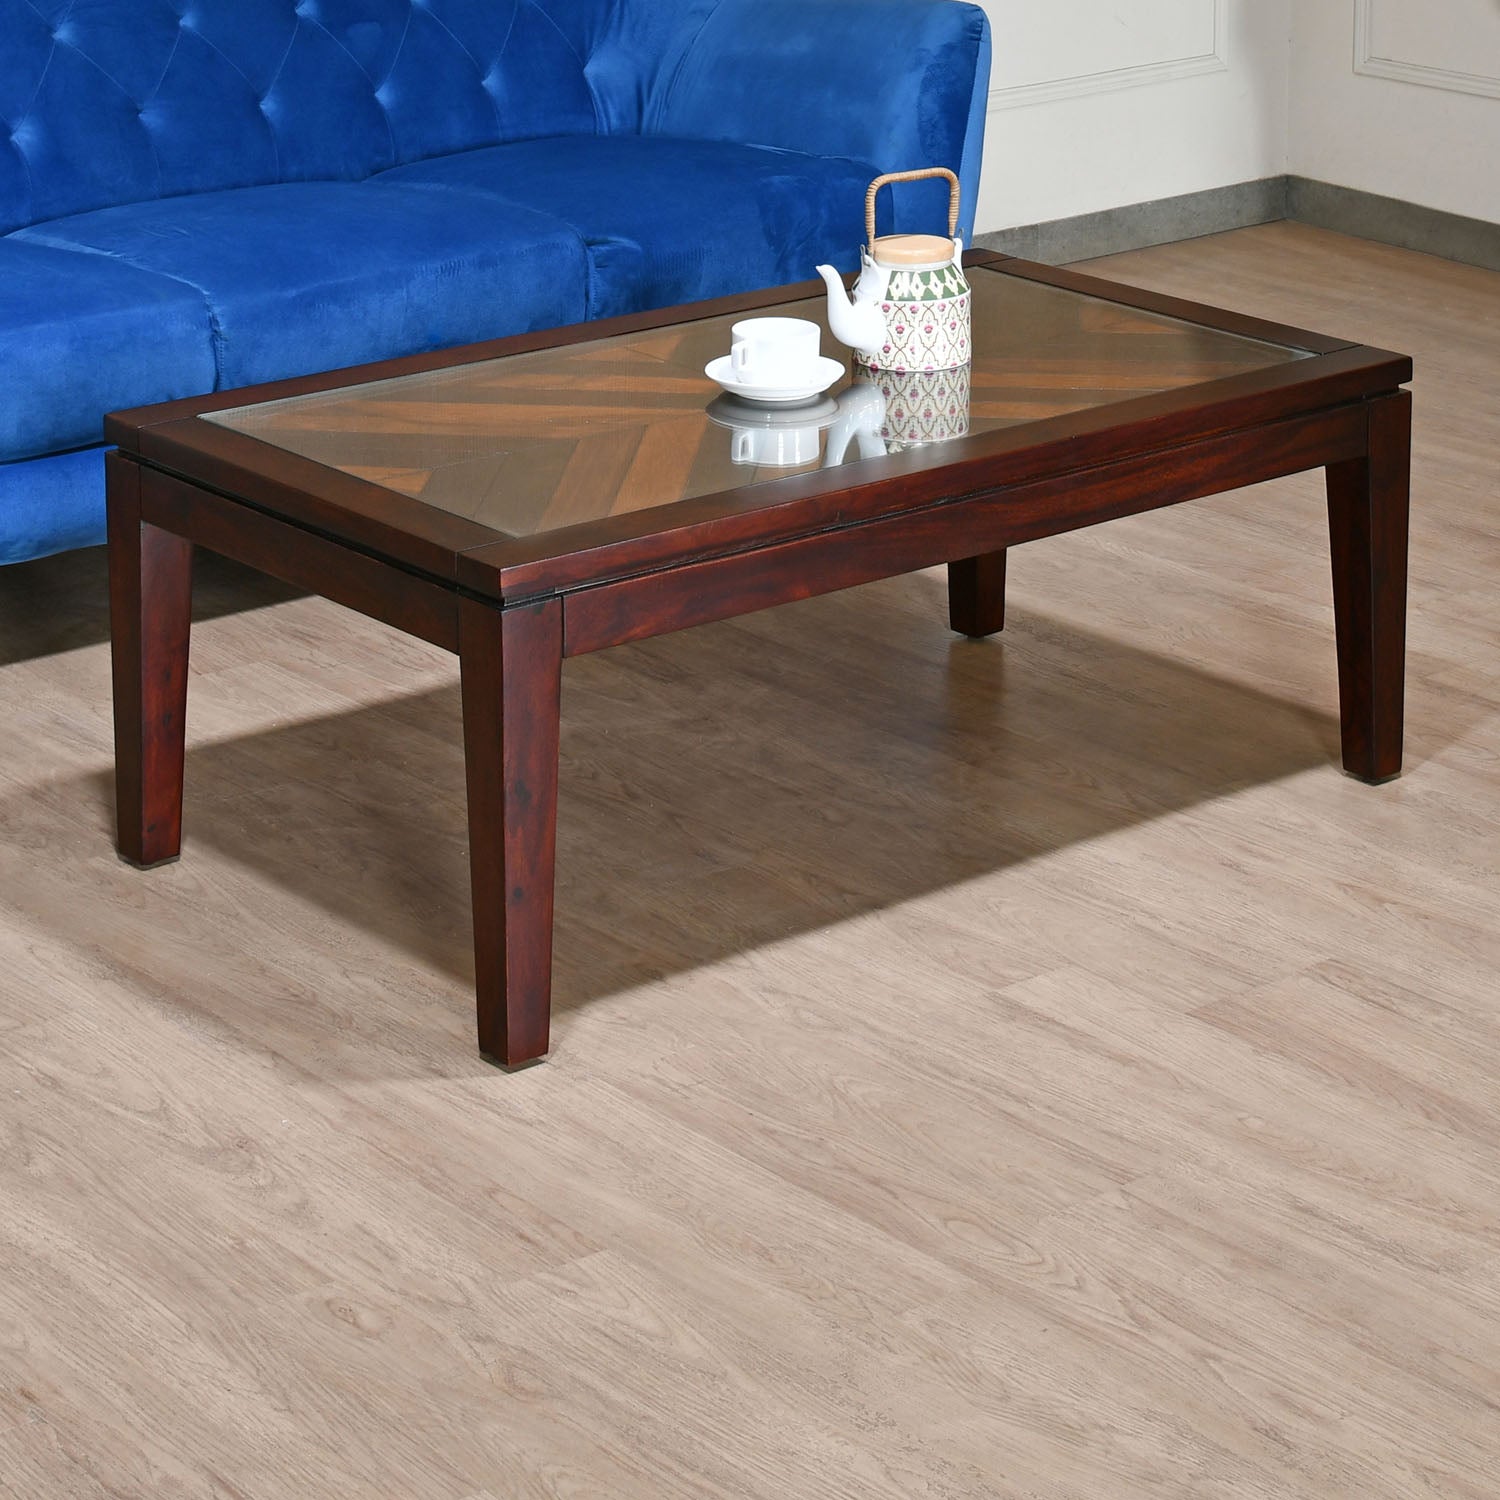 Spitzer Glass Top Solid Wood Center Table (Walnut)